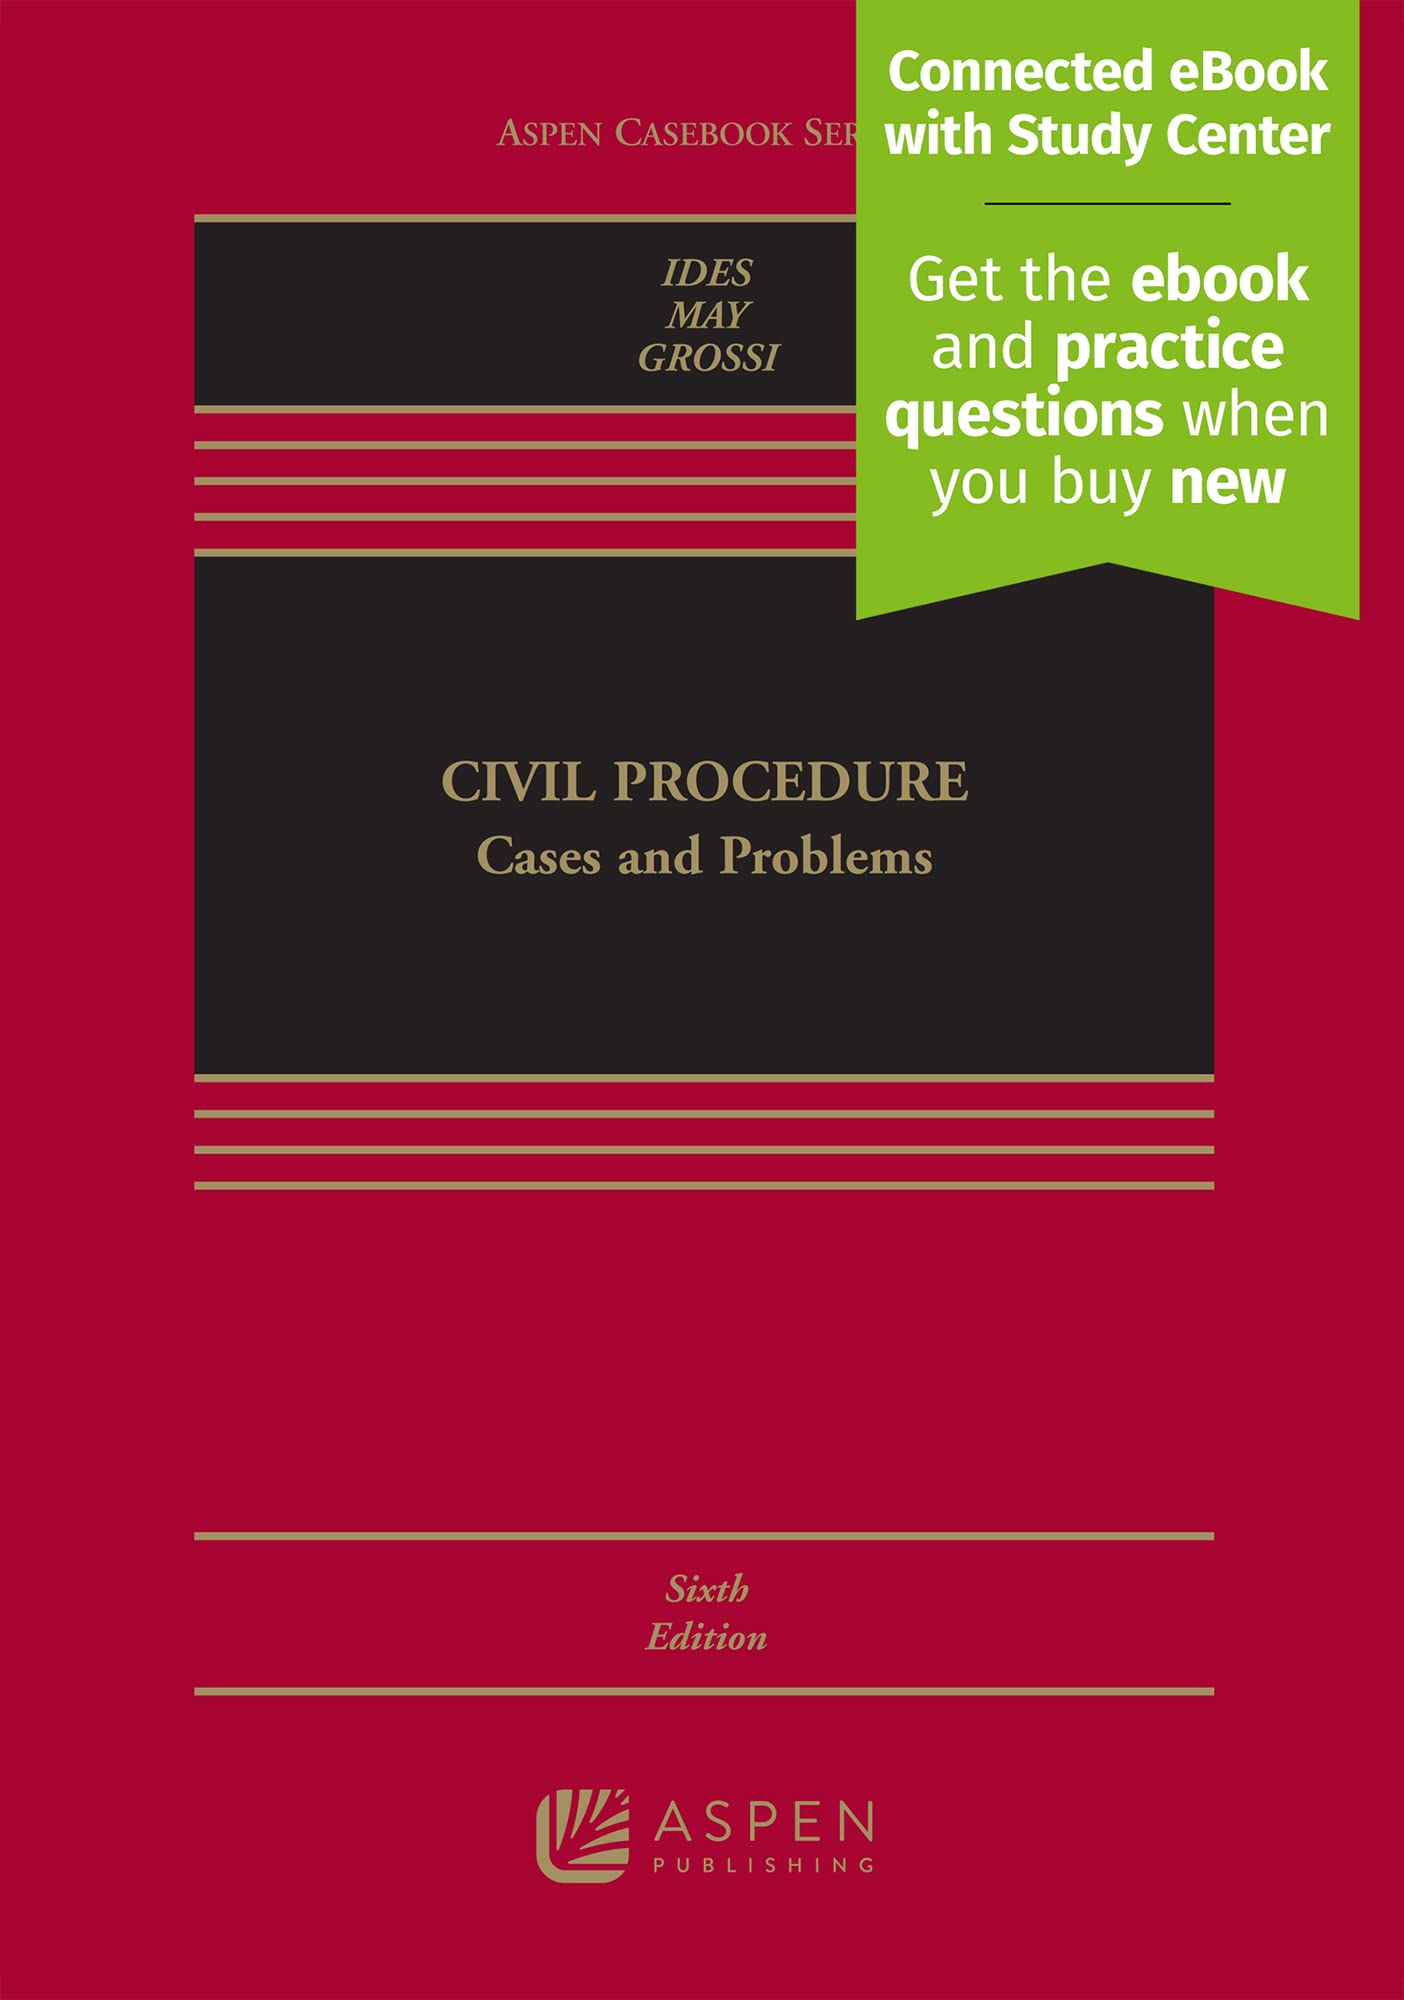 Civil Procedure: Cases and Problems [Connected eBook with Study Center] (Aspen Casebook)